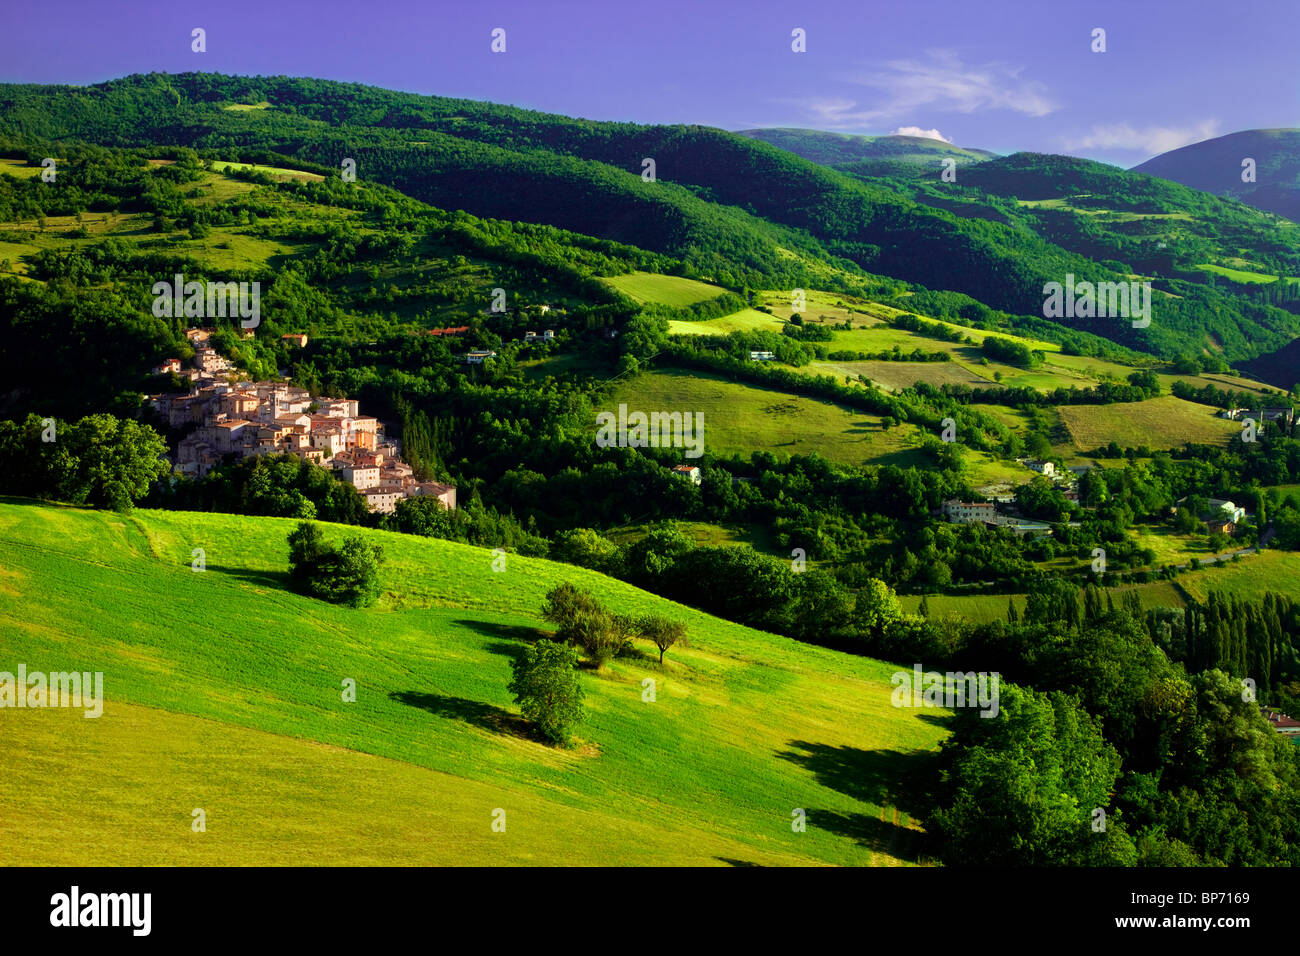 The medieval town of Preci in the Valnerina, Umbria Italy Stock Photo